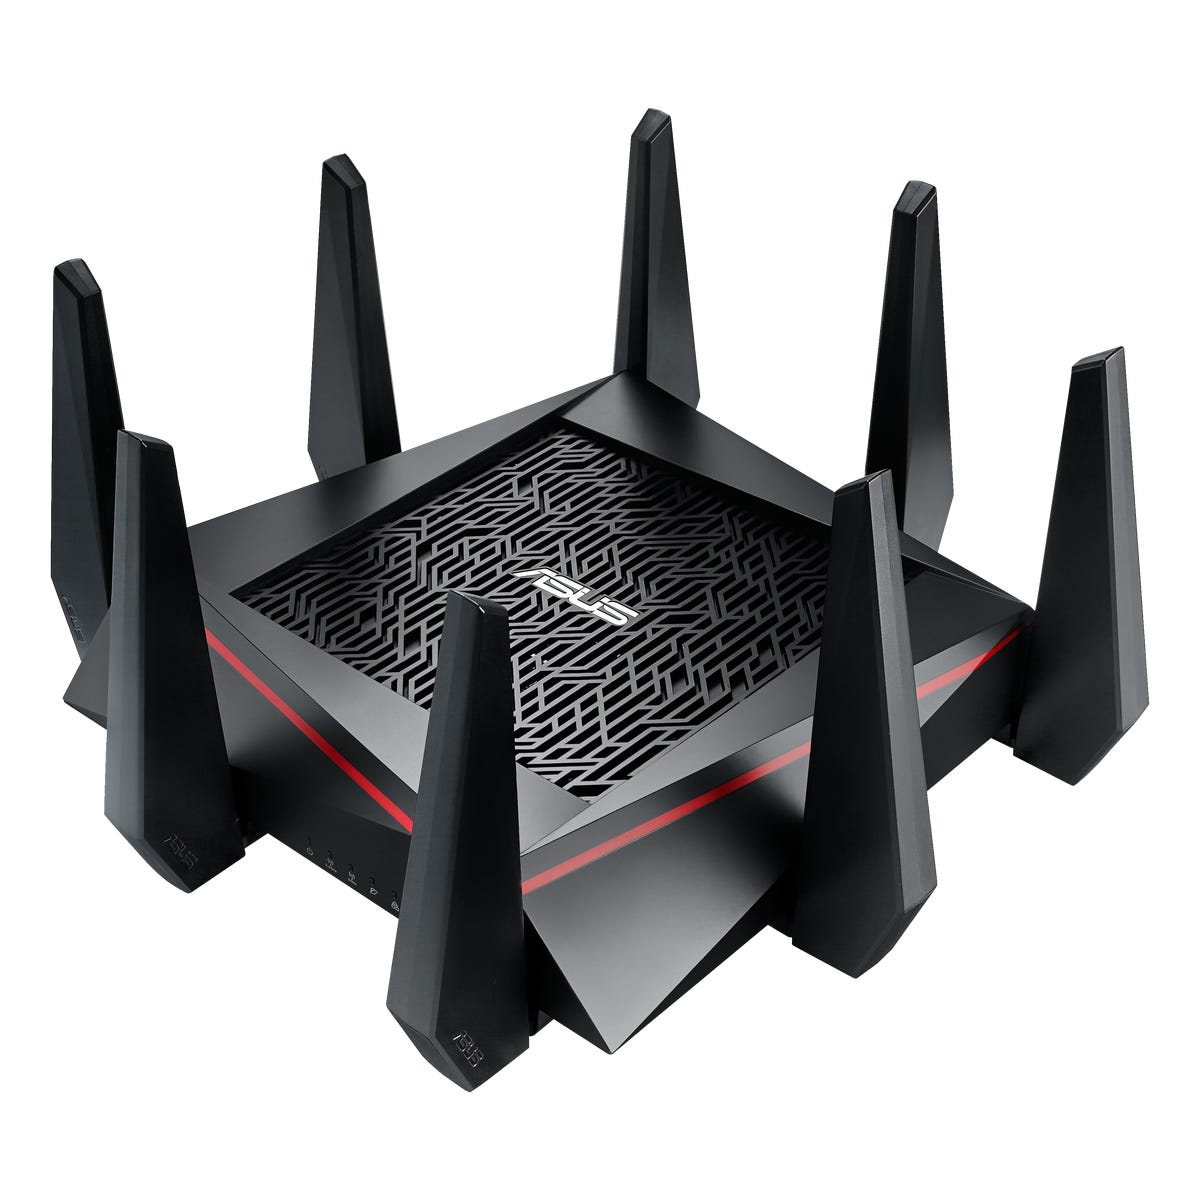 Asus RT-AC5300U router review: Asus RT-AC5300: a monster of a router - CNET